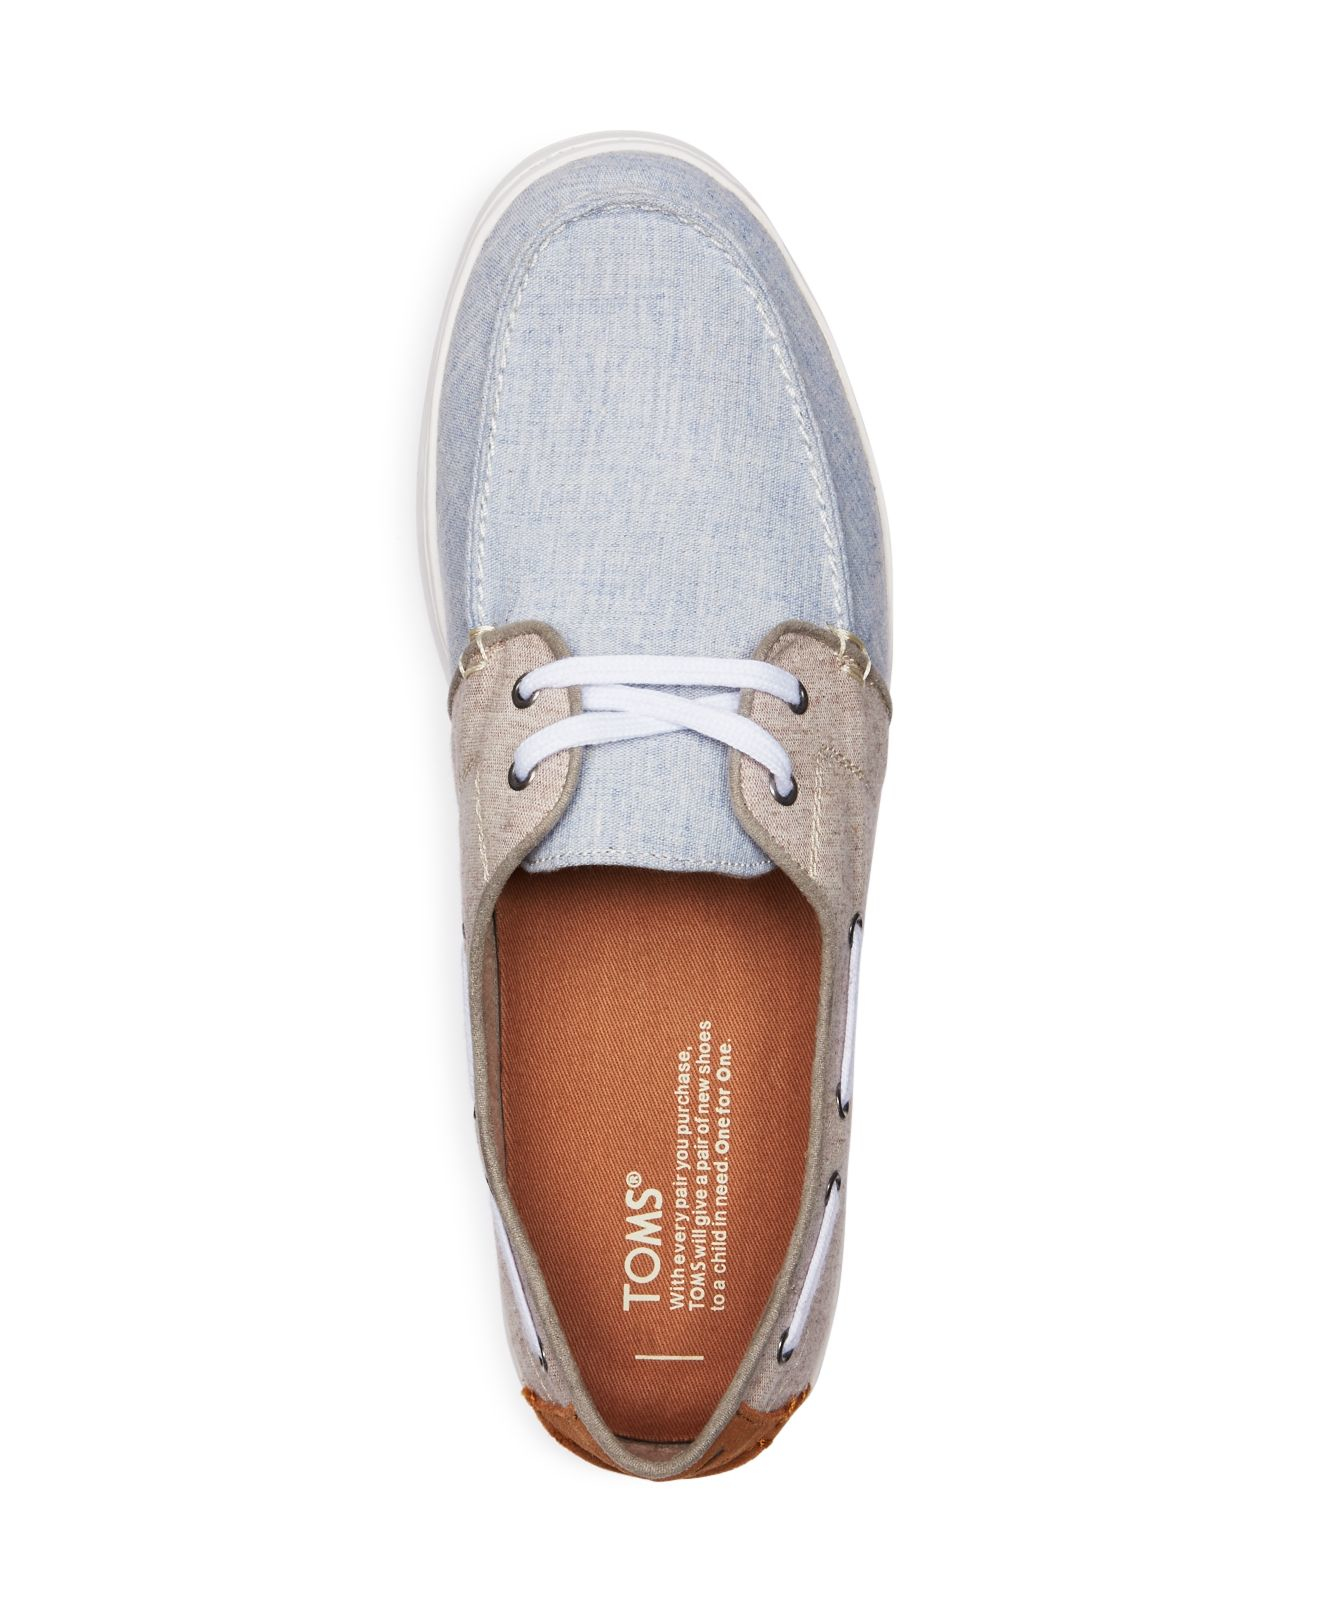 TOMS Suede Culver Lace Up Boat Shoes in 